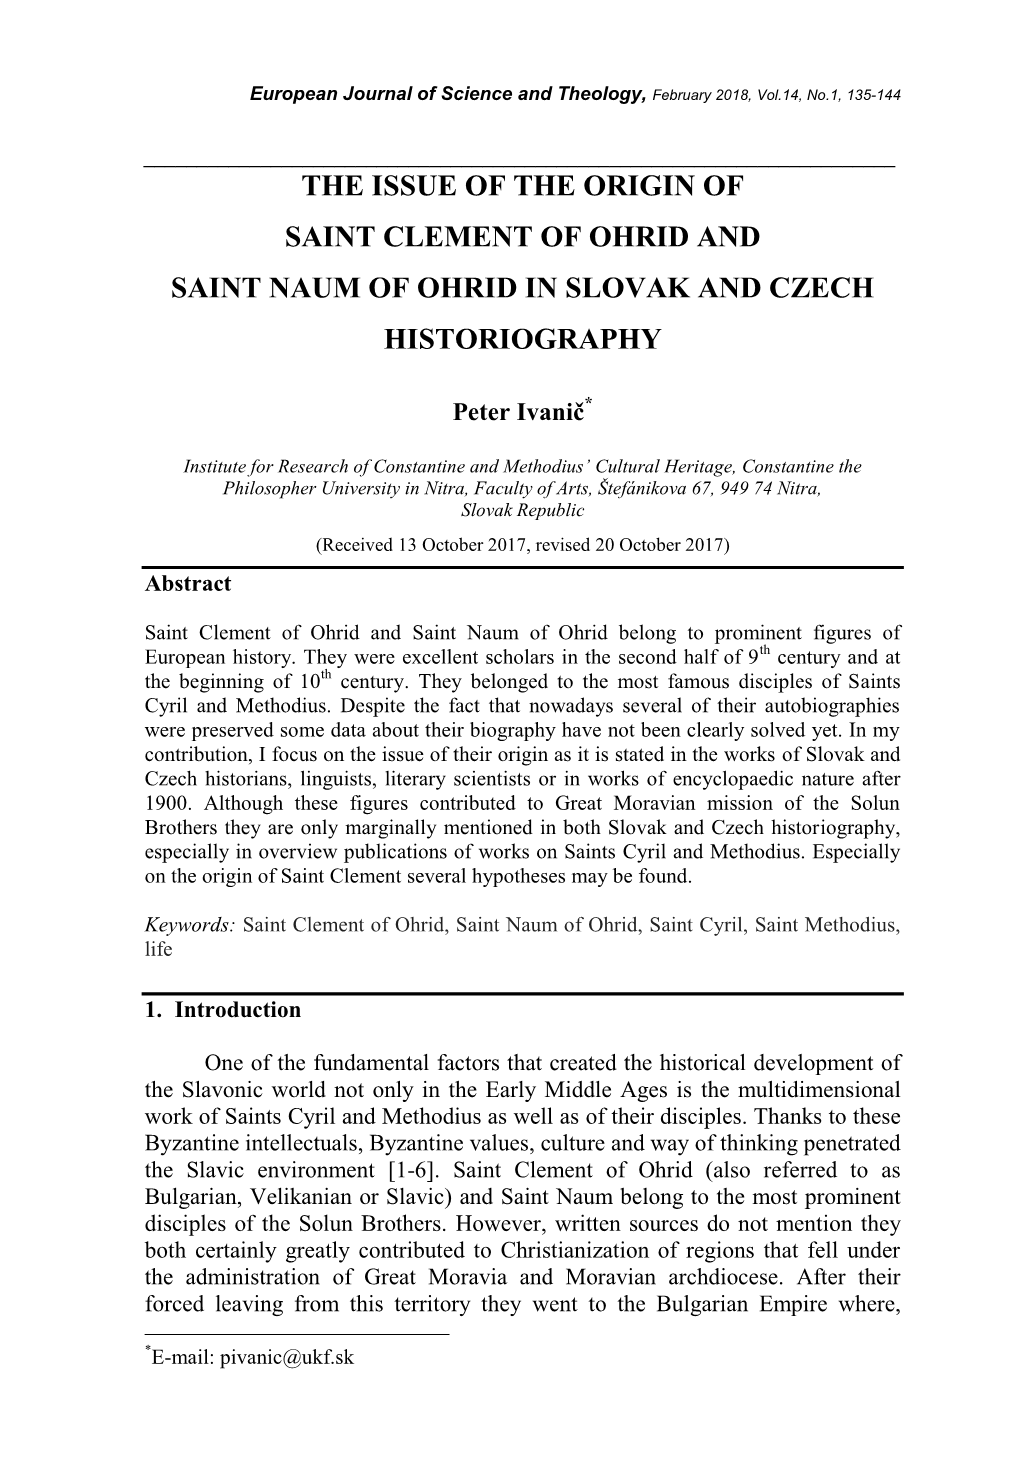 The Issue of the Origin of Saint Clement of Ohrid and Saint Naum of Ohrid in Slovak and Czech Historiography